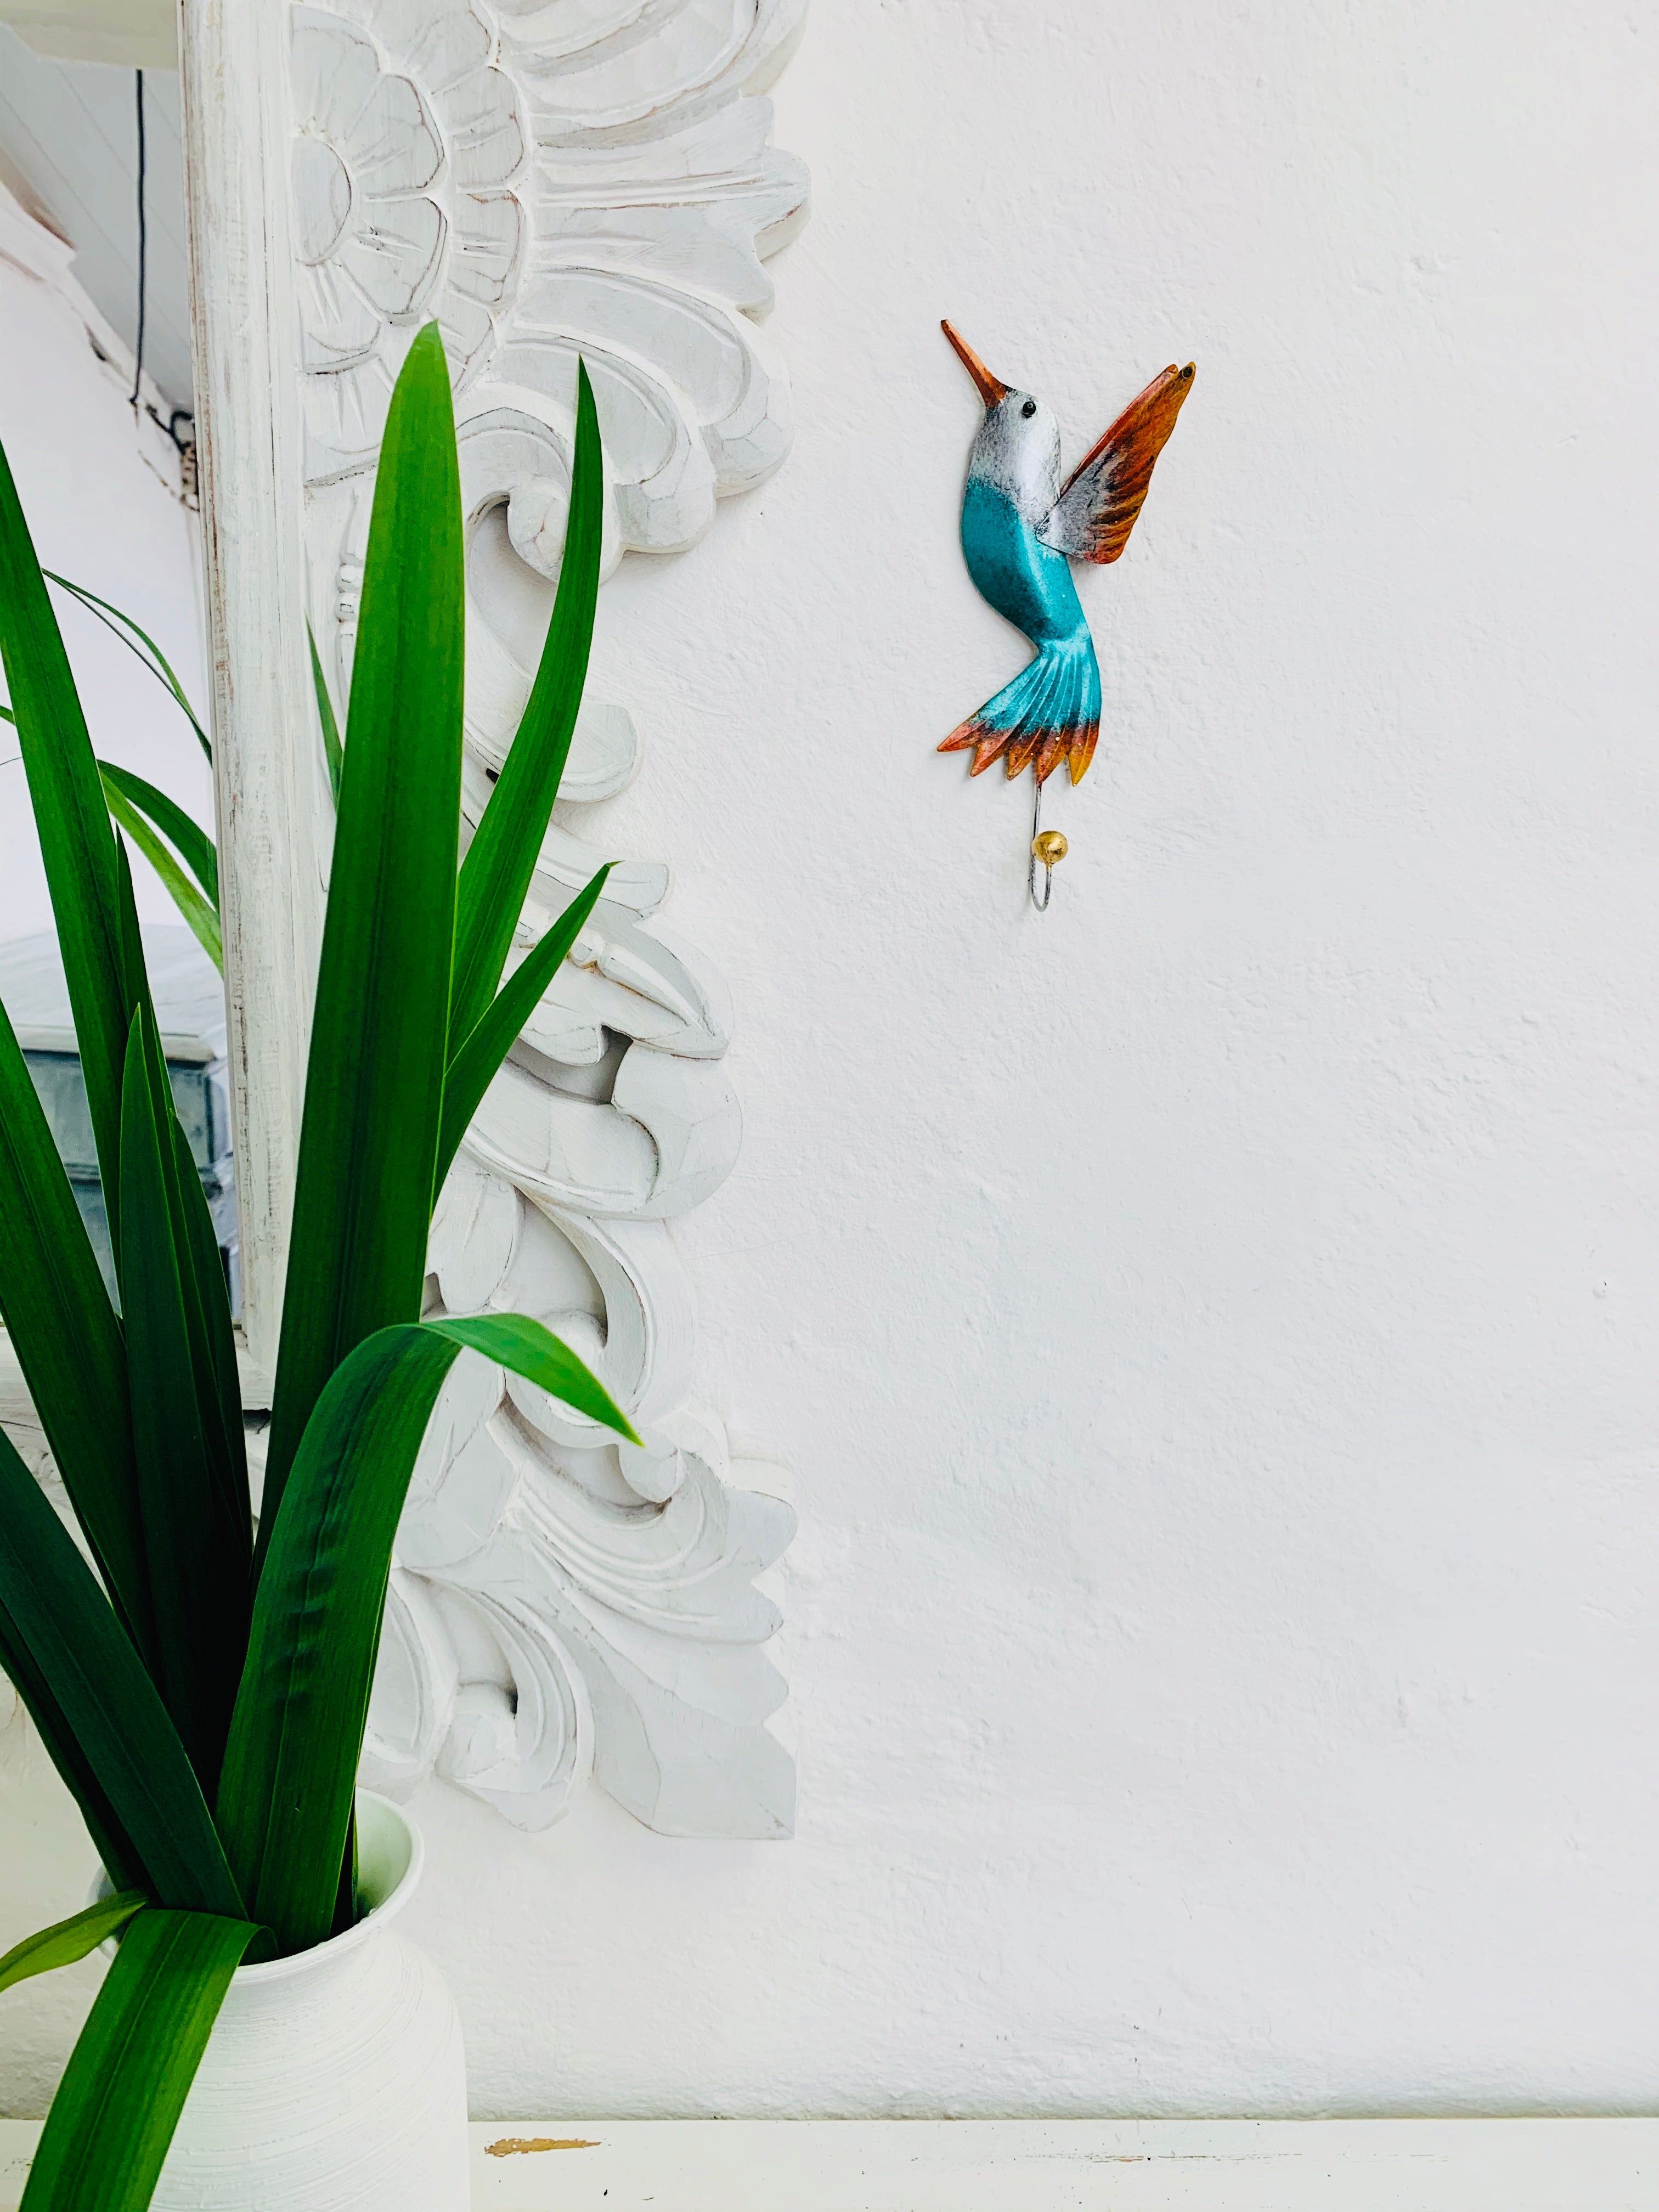 display view of hummingbird hook attached to the wall by a green plant